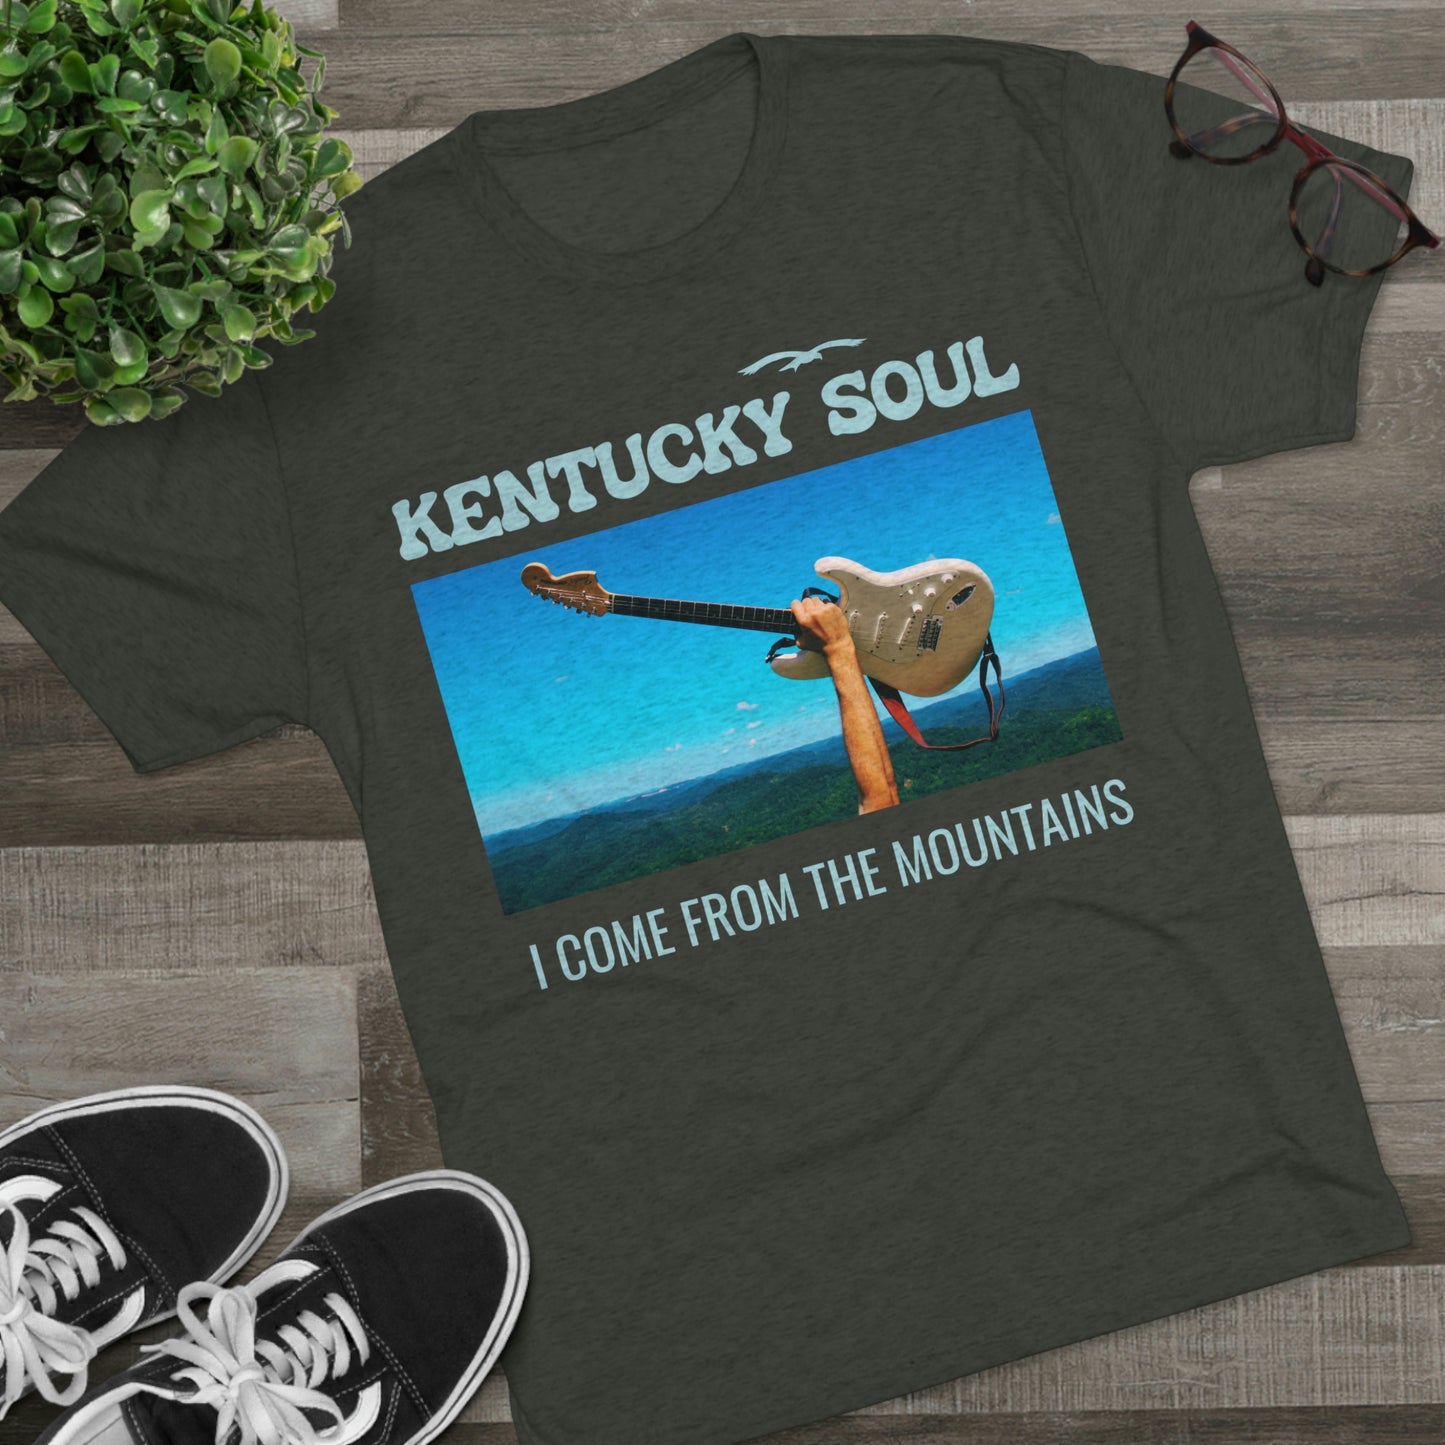 Men's I Come From the Mountains Single Cover Tri-Blend- Tee